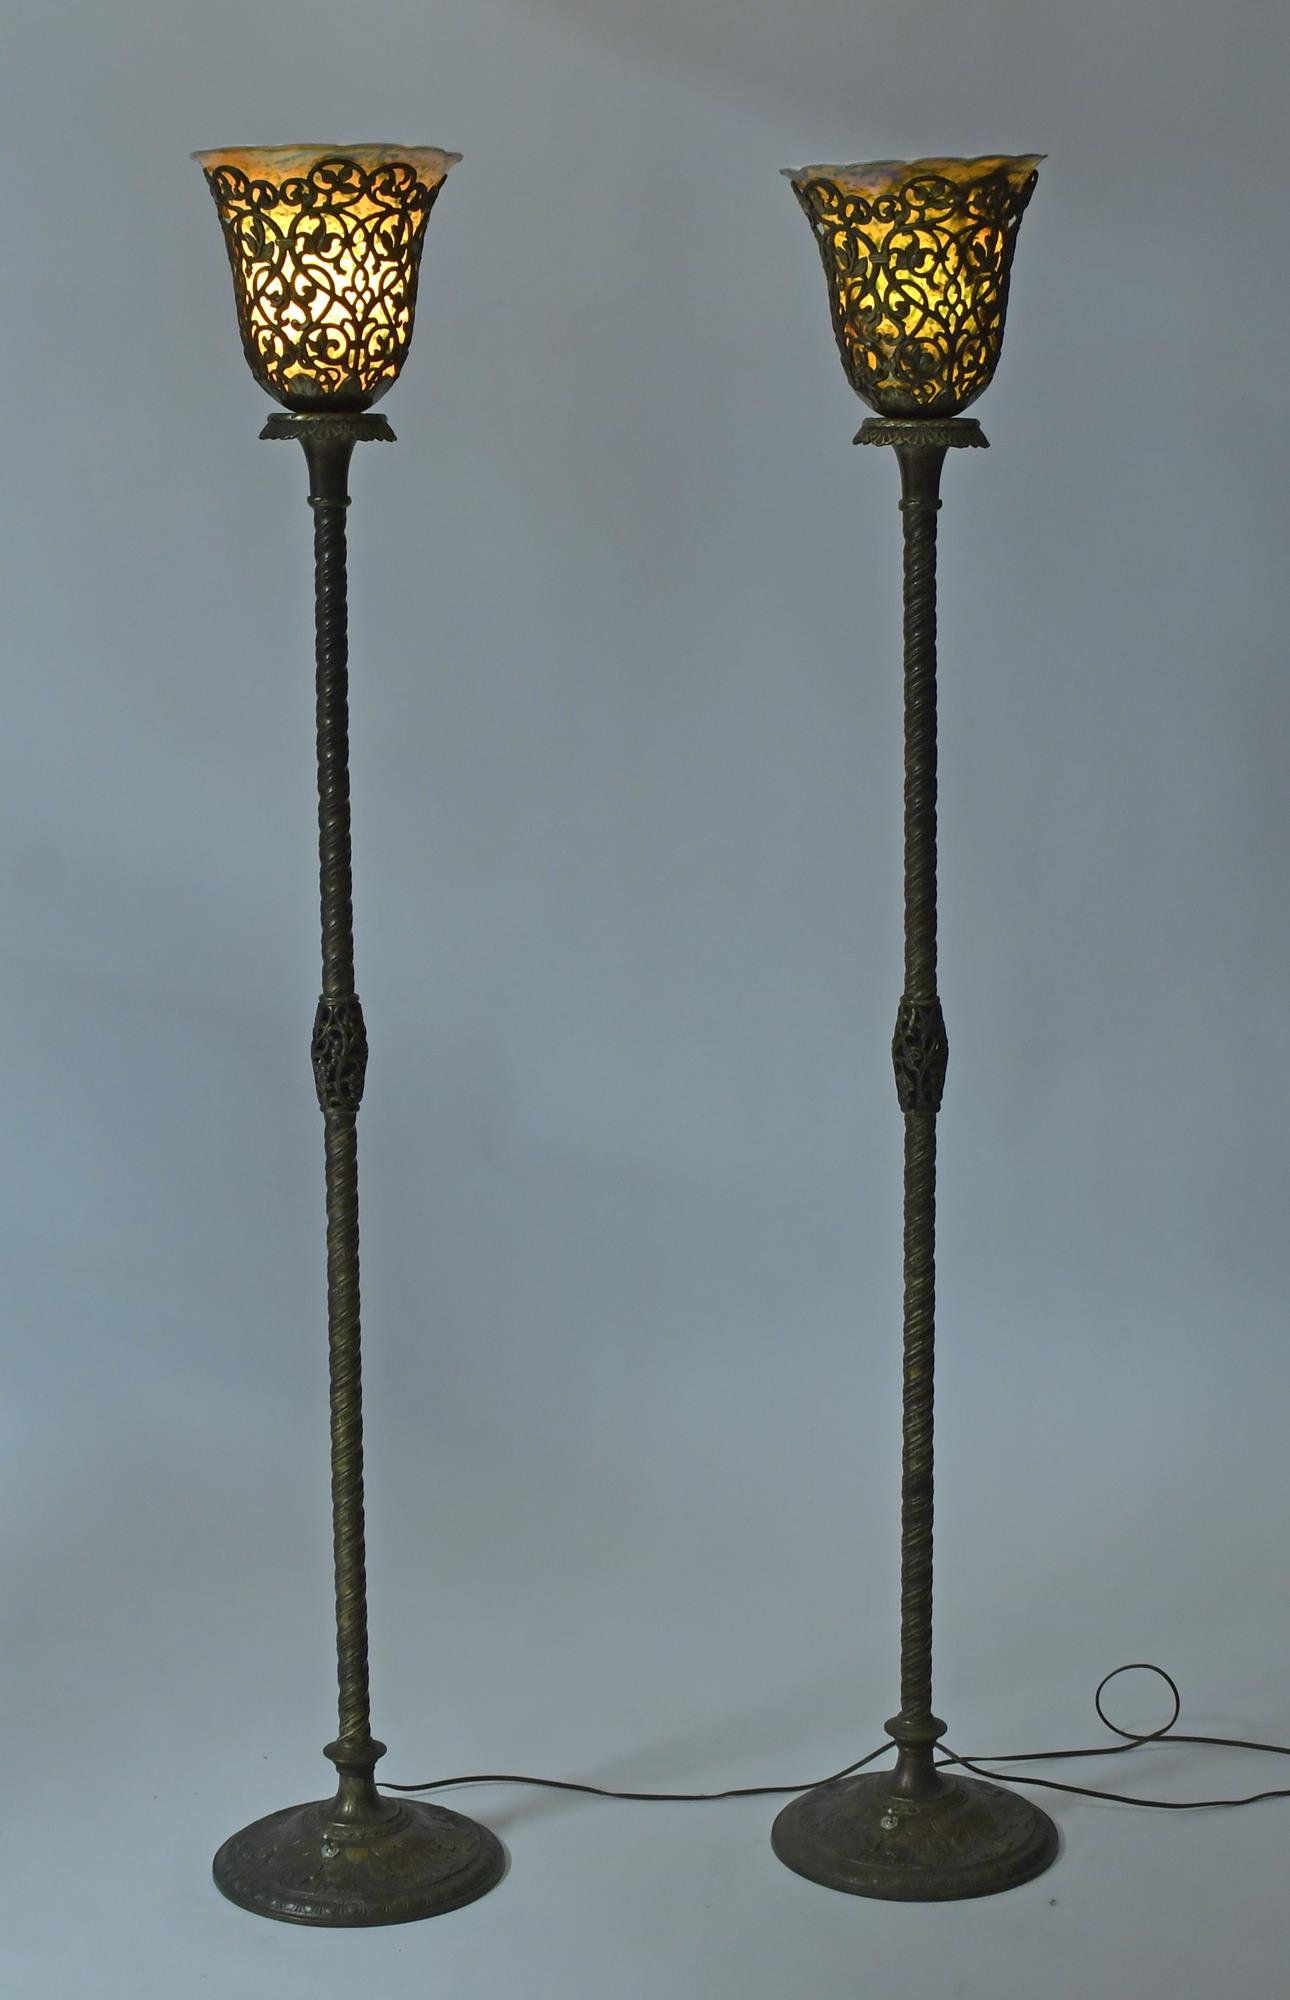 PAIR OF BRONZE TORCHERES STYLE 3ac91f